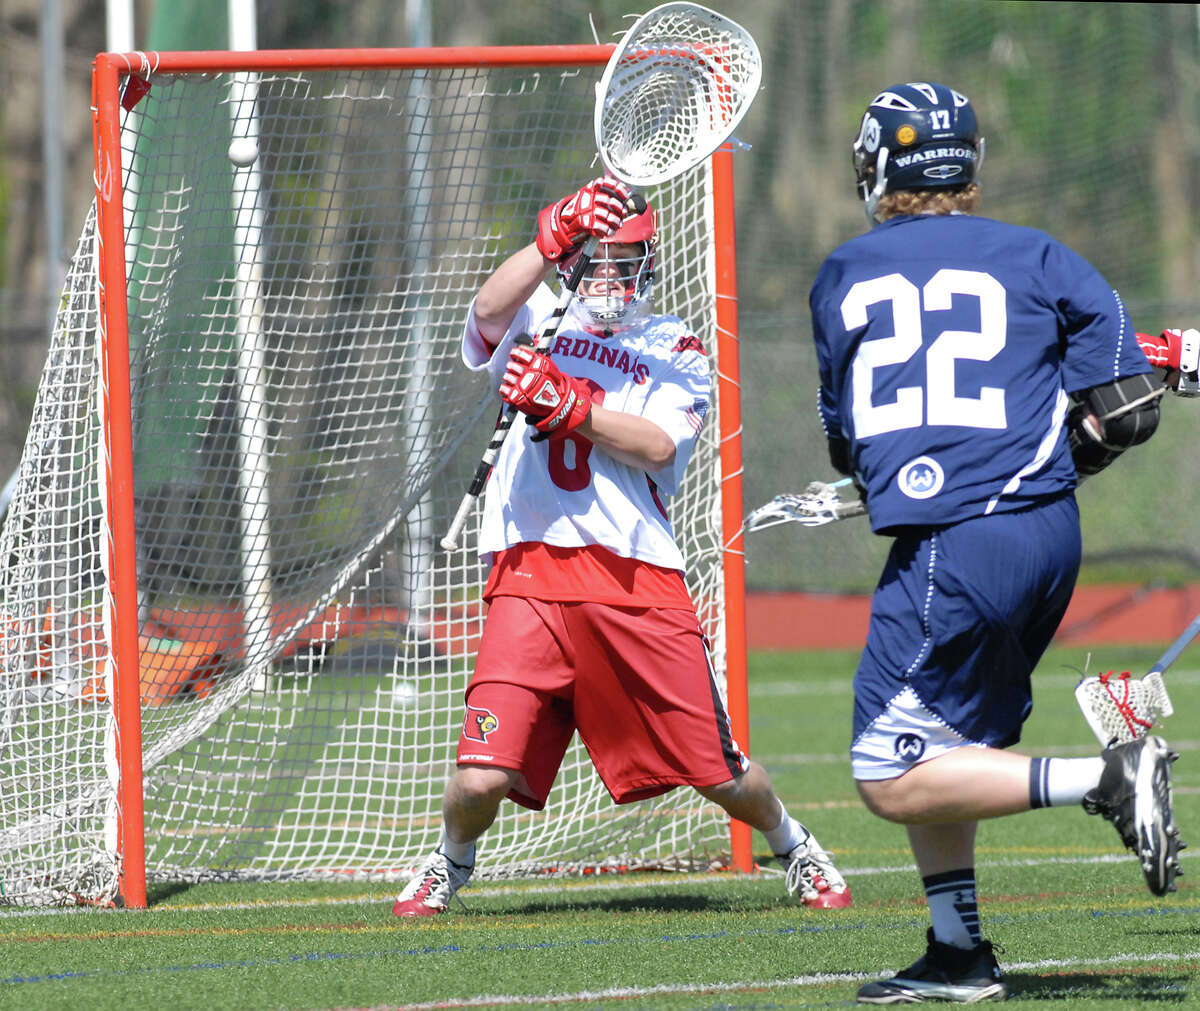 At right, Michael Slaughter # 22 of Wilton High School scores on Greenwich goalie Ryan Fisher during the boys high school lacrosse match between Greenwich High School and Wilton High School at Greenwich, Saturday, April 7, 2012. Wilton defeated Greenwich 13-9.